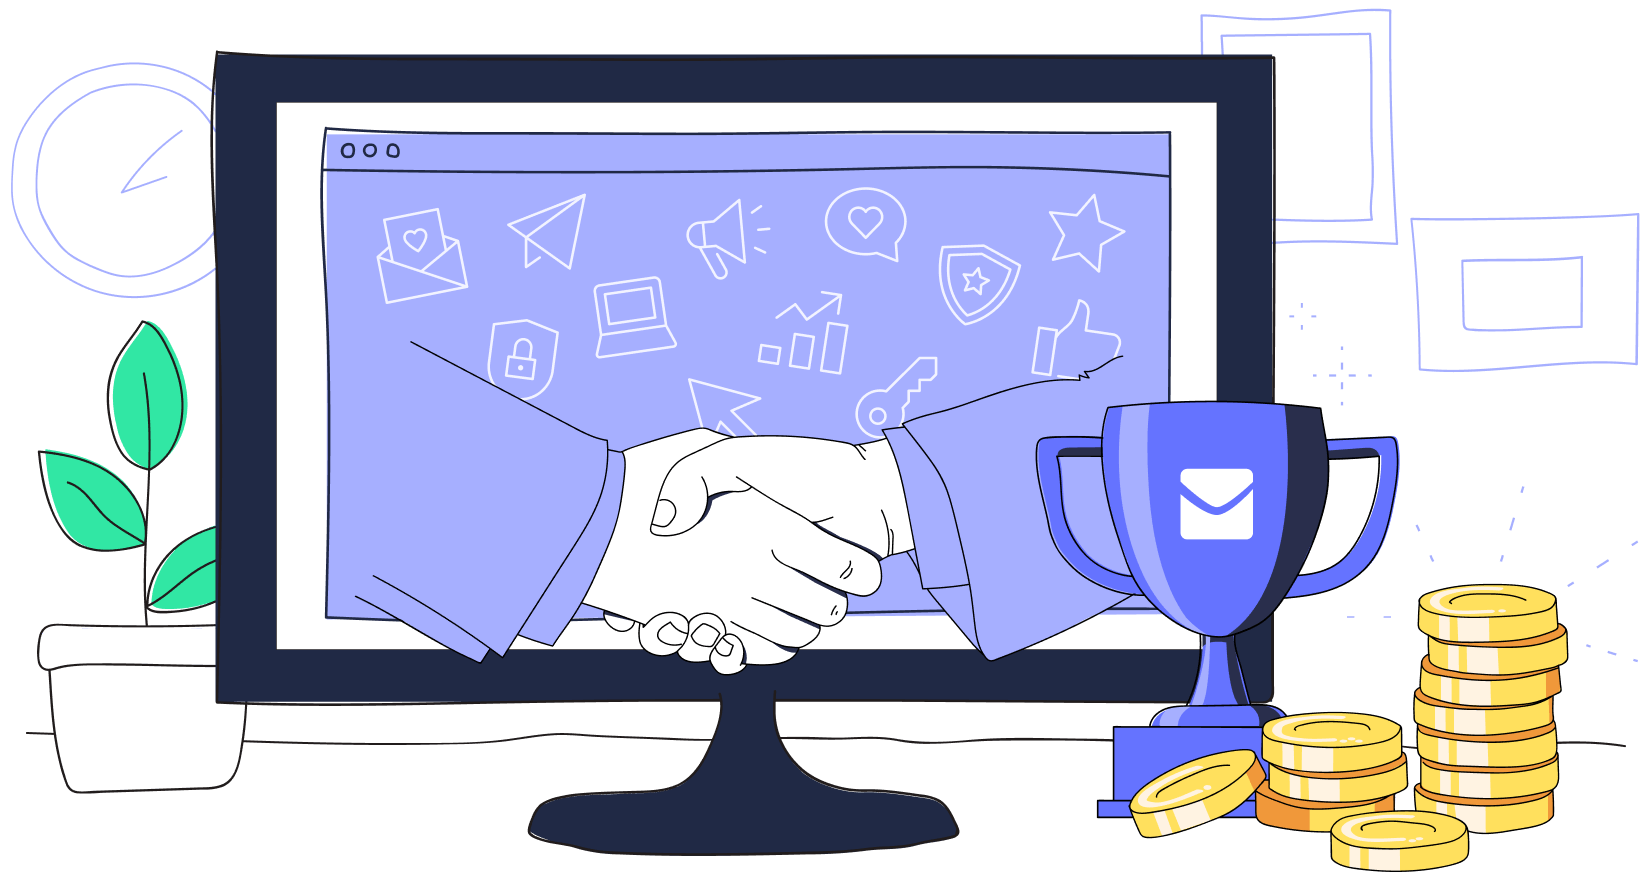 Illustration in the StartMail brand style, in the center a desktop displaying a handshake surrounded by privacy themed icons. On the left side of the desktop a plant and a clock. On the right side a trophy with StartMail's icon of an envelope, and a stack of coins.